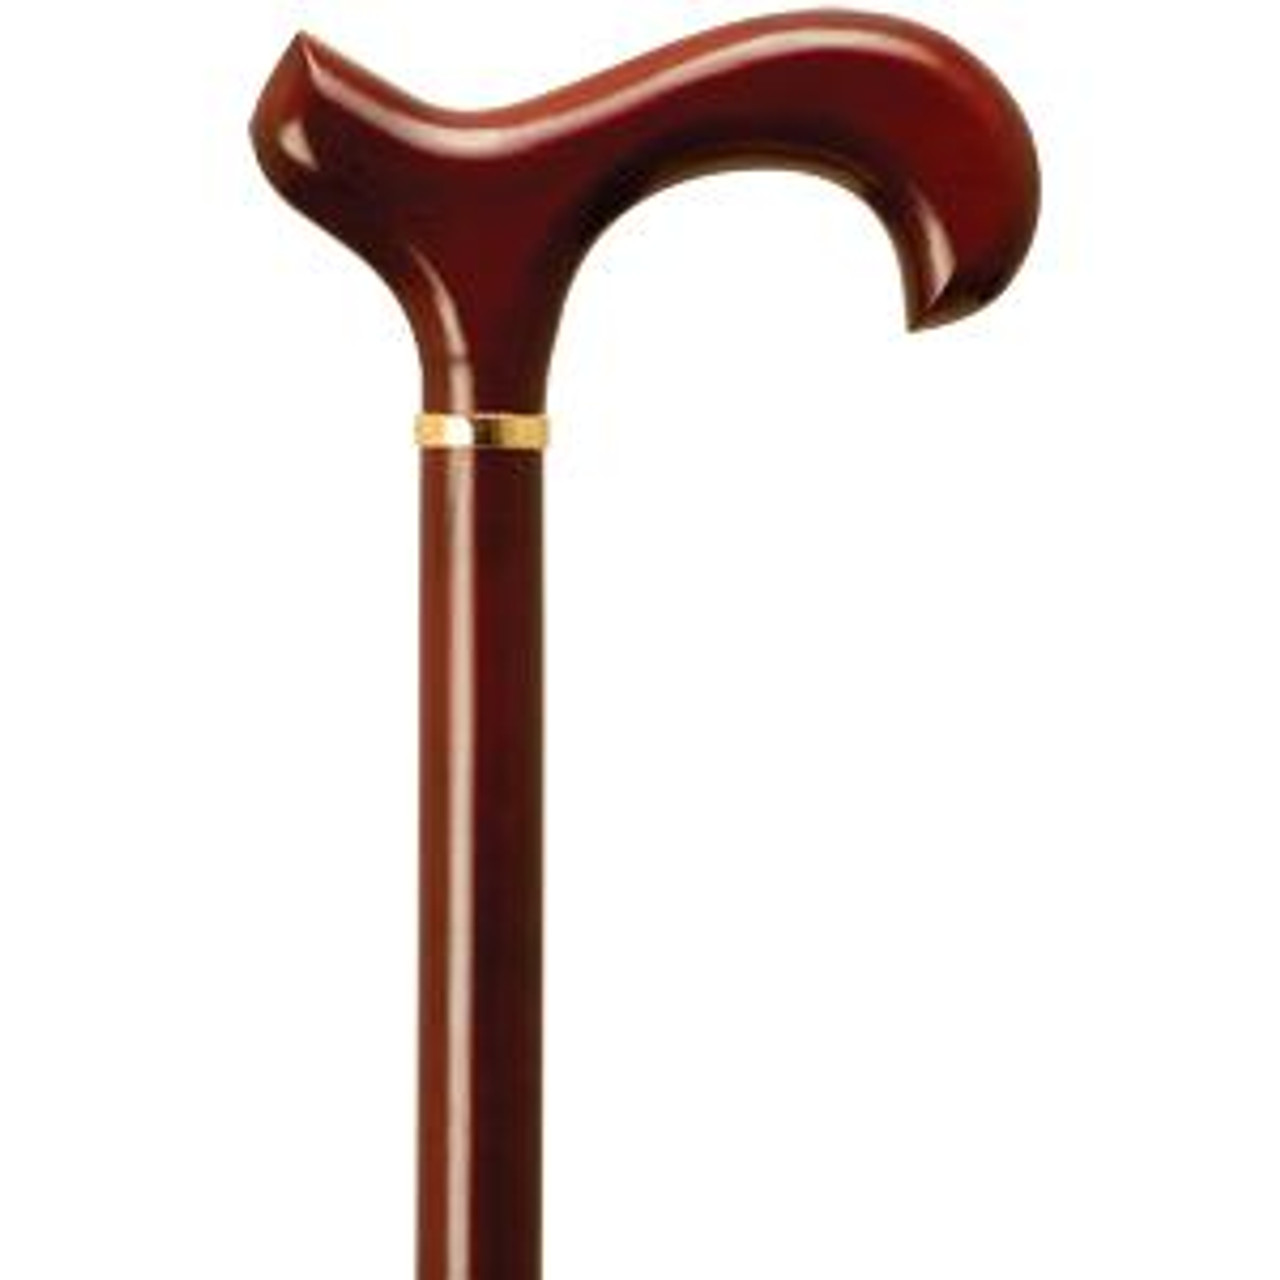 Alex Orthopedic Men's Derby Handle Cane in Rosewood